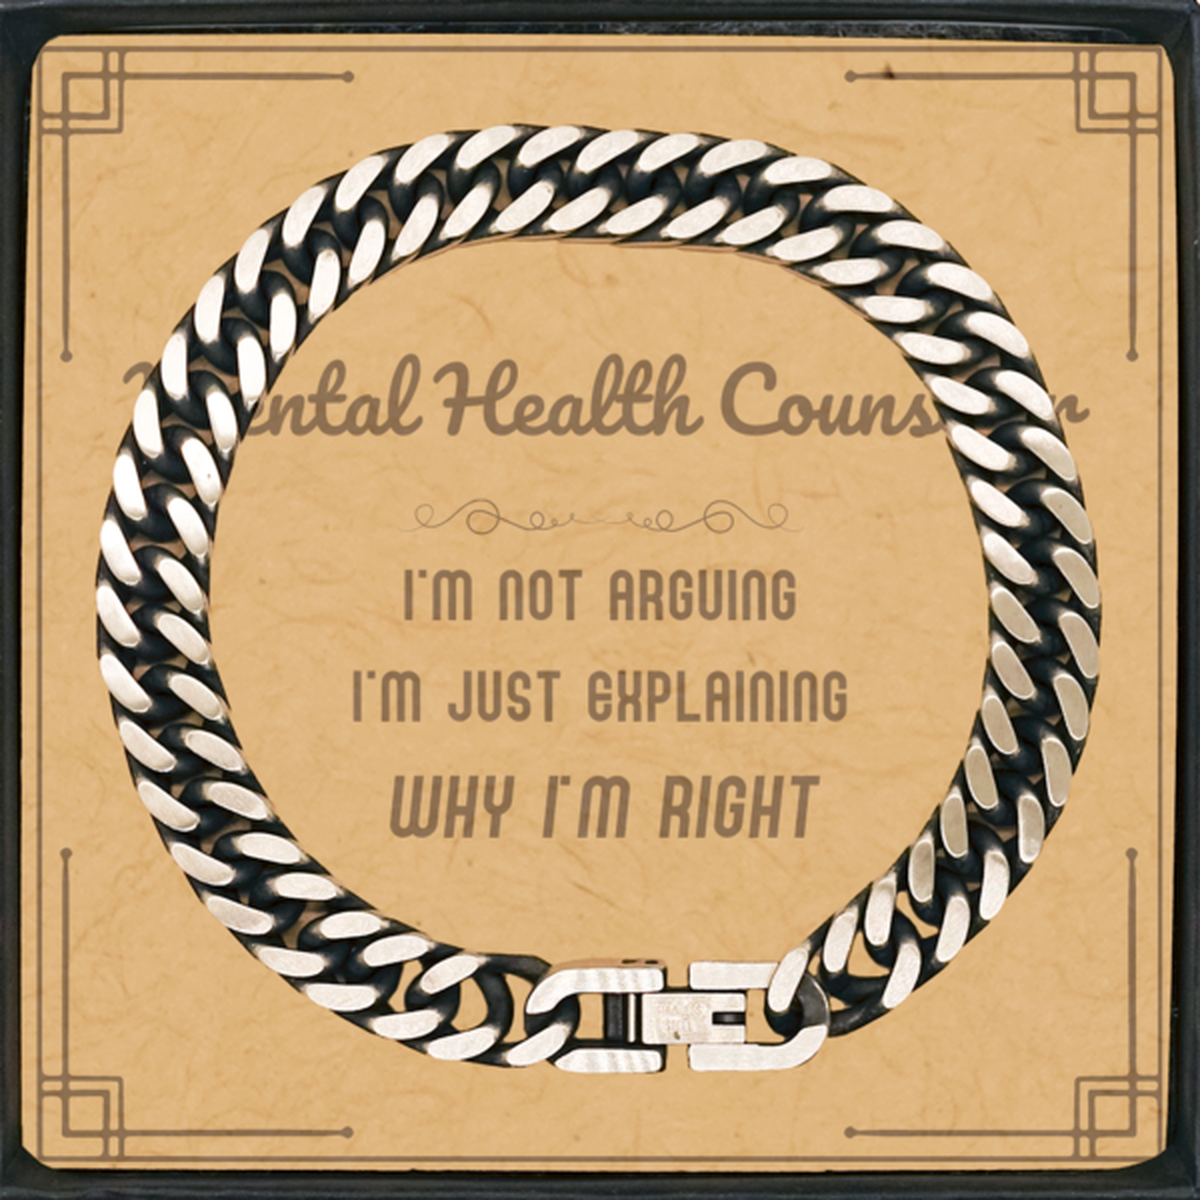 Mental Health Counselor I'm not Arguing. I'm Just Explaining Why I'm RIGHT Cuban Link Chain Bracelet, Funny Saying Quote Mental Health Counselor Gifts For Mental Health Counselor Message Card Graduation Birthday Christmas Gifts for Men Women Coworker